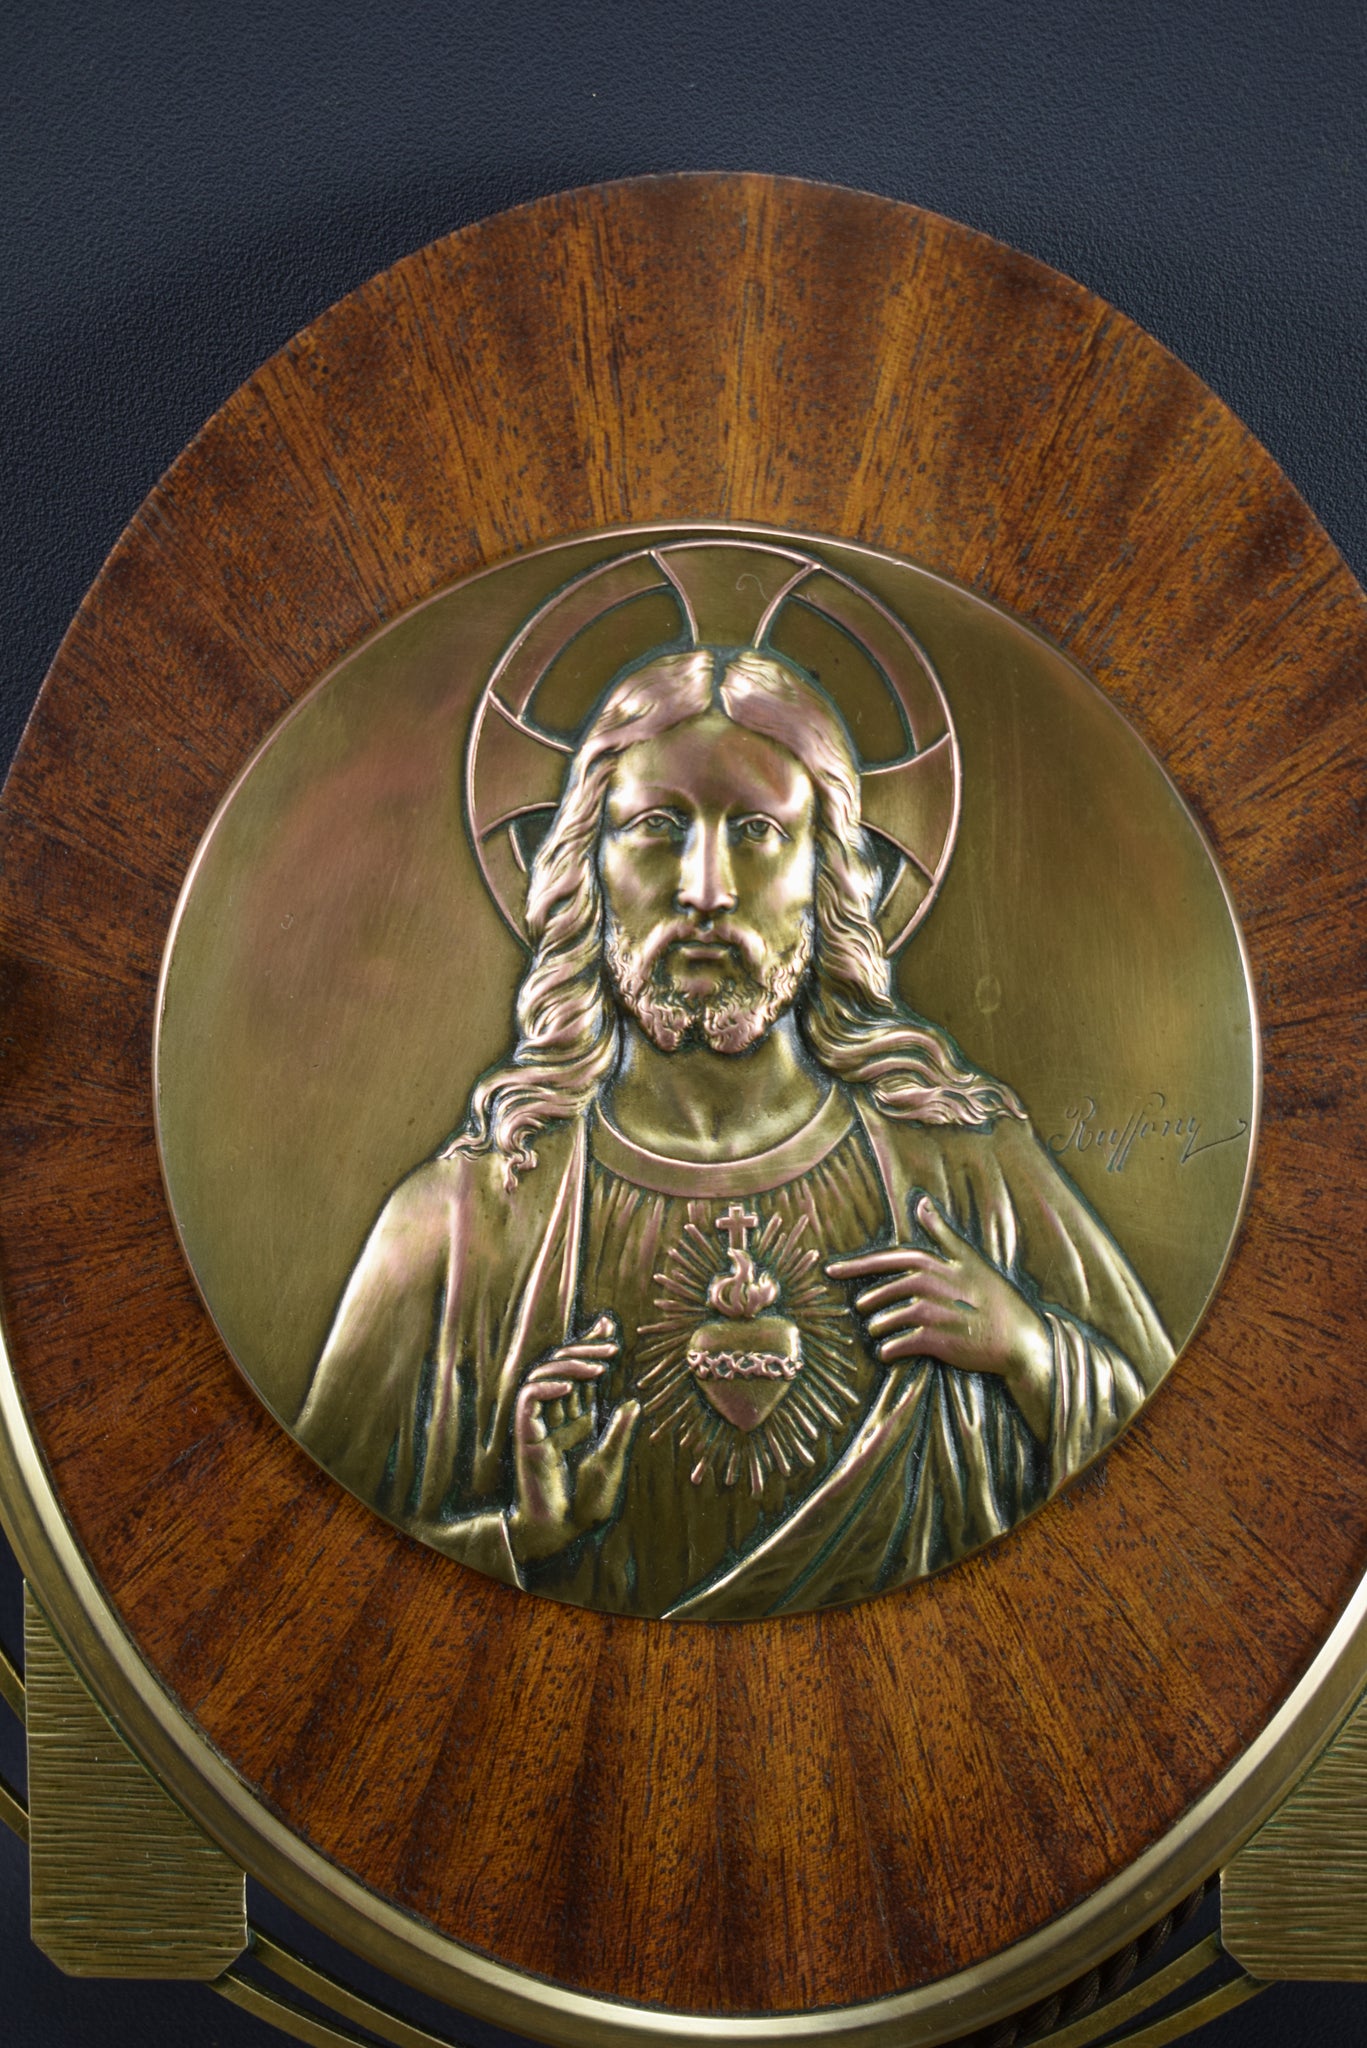 Vintage French Art Deco Religious Wall Plaque signed RUFFONY